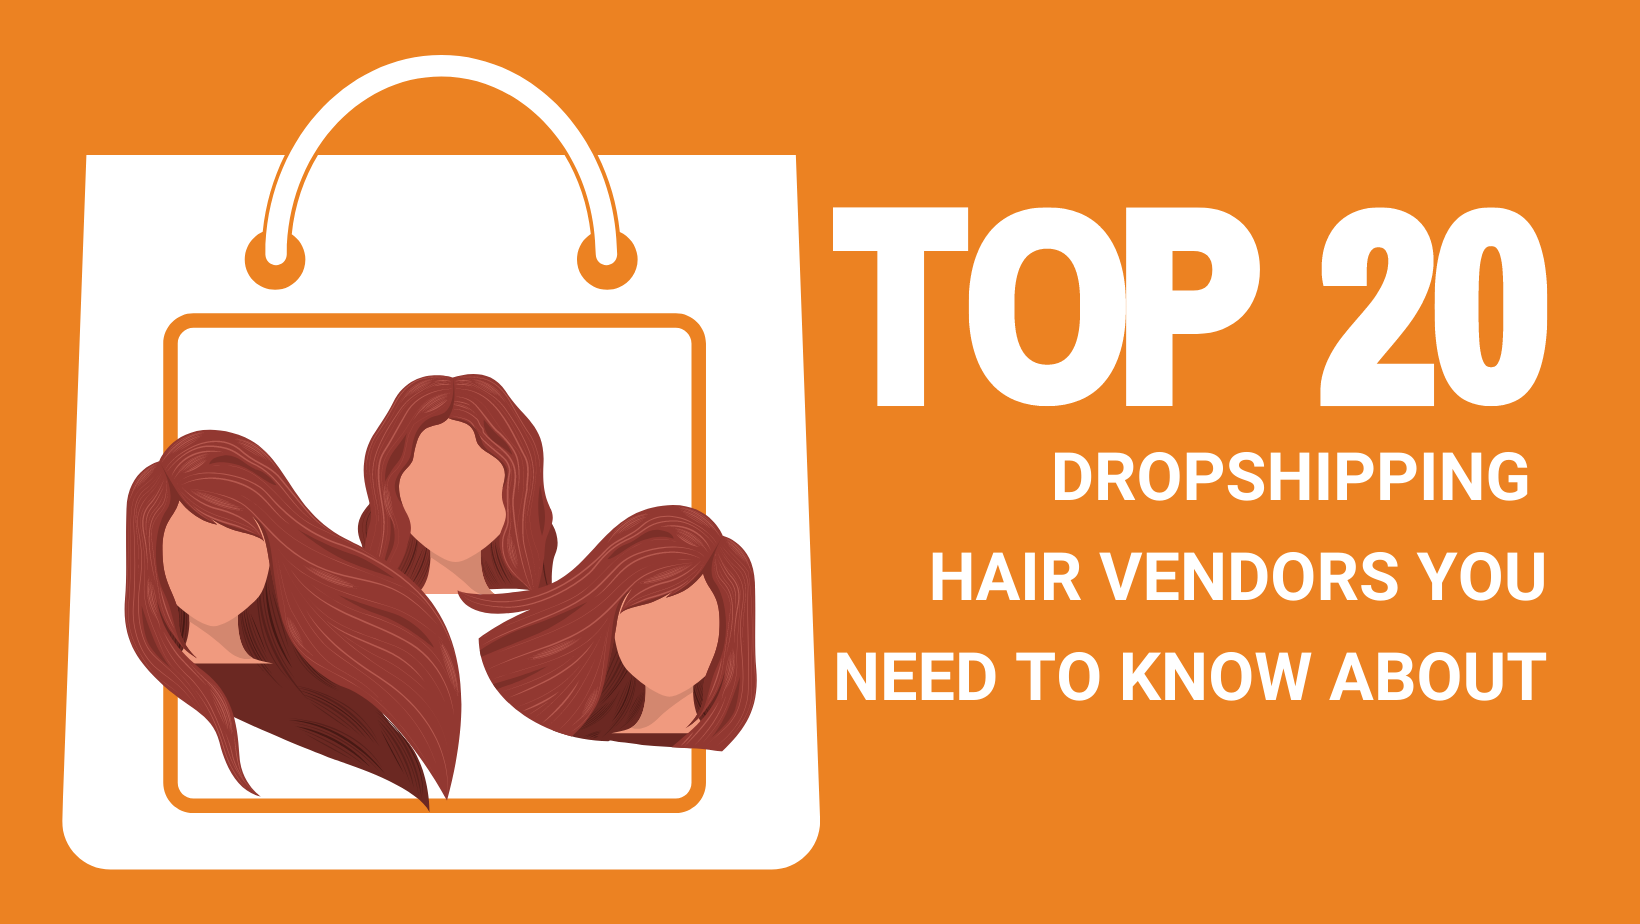 Top 20 Dropshipping Hair Vendors You Need to Know About - Dropshipping From  China | NicheDropshipping